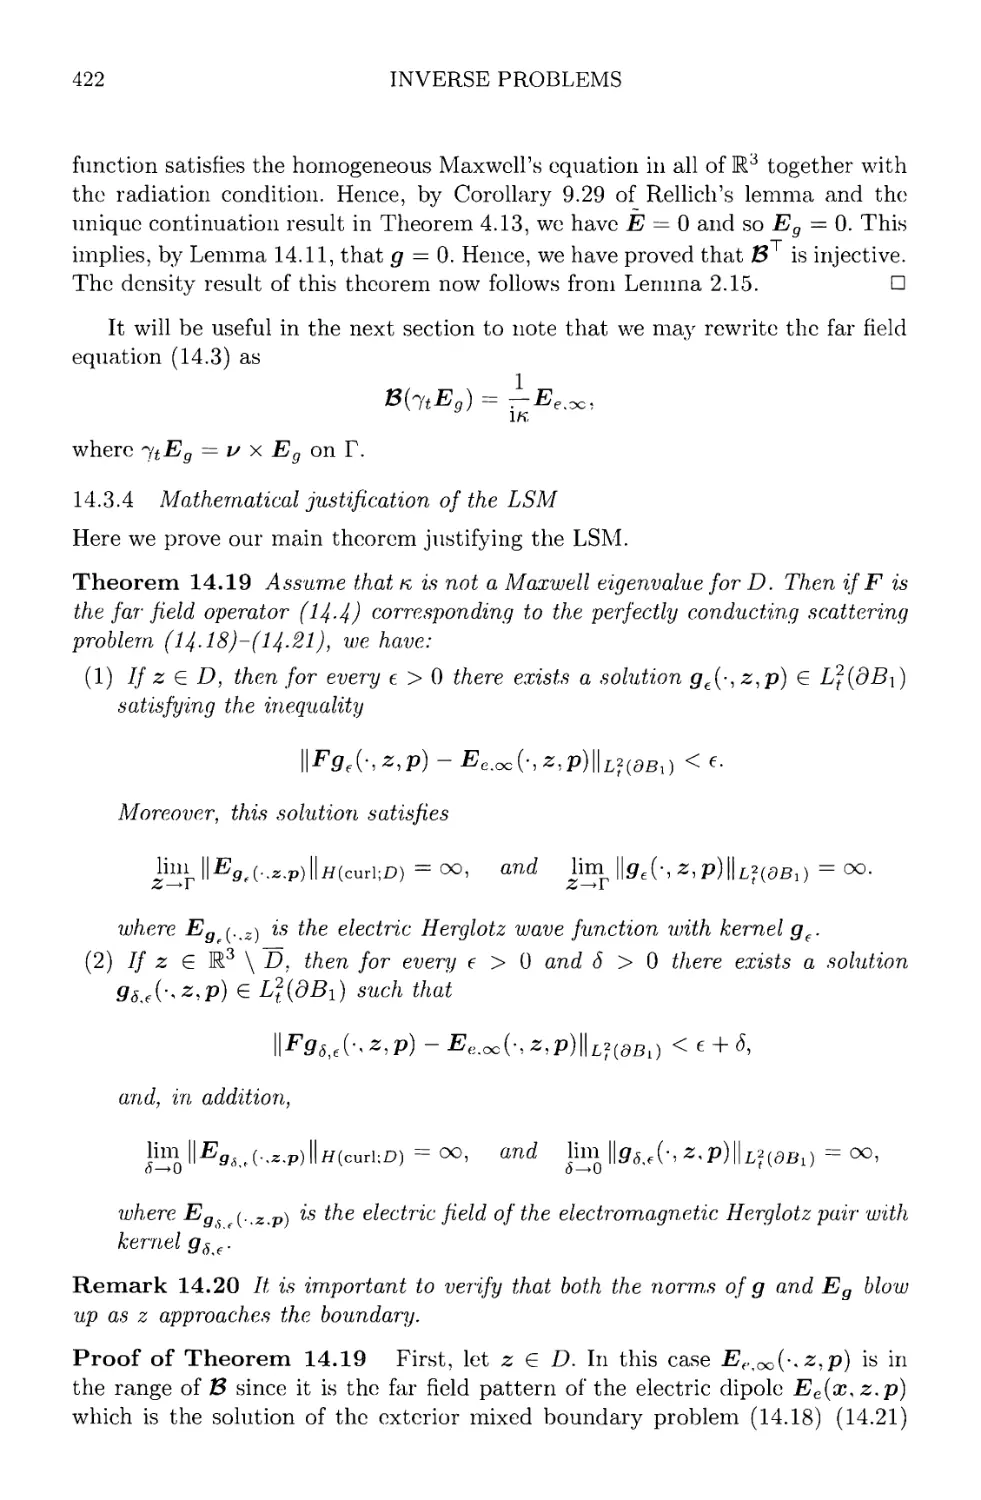 14.3.4 Mathematical justification of the LSM